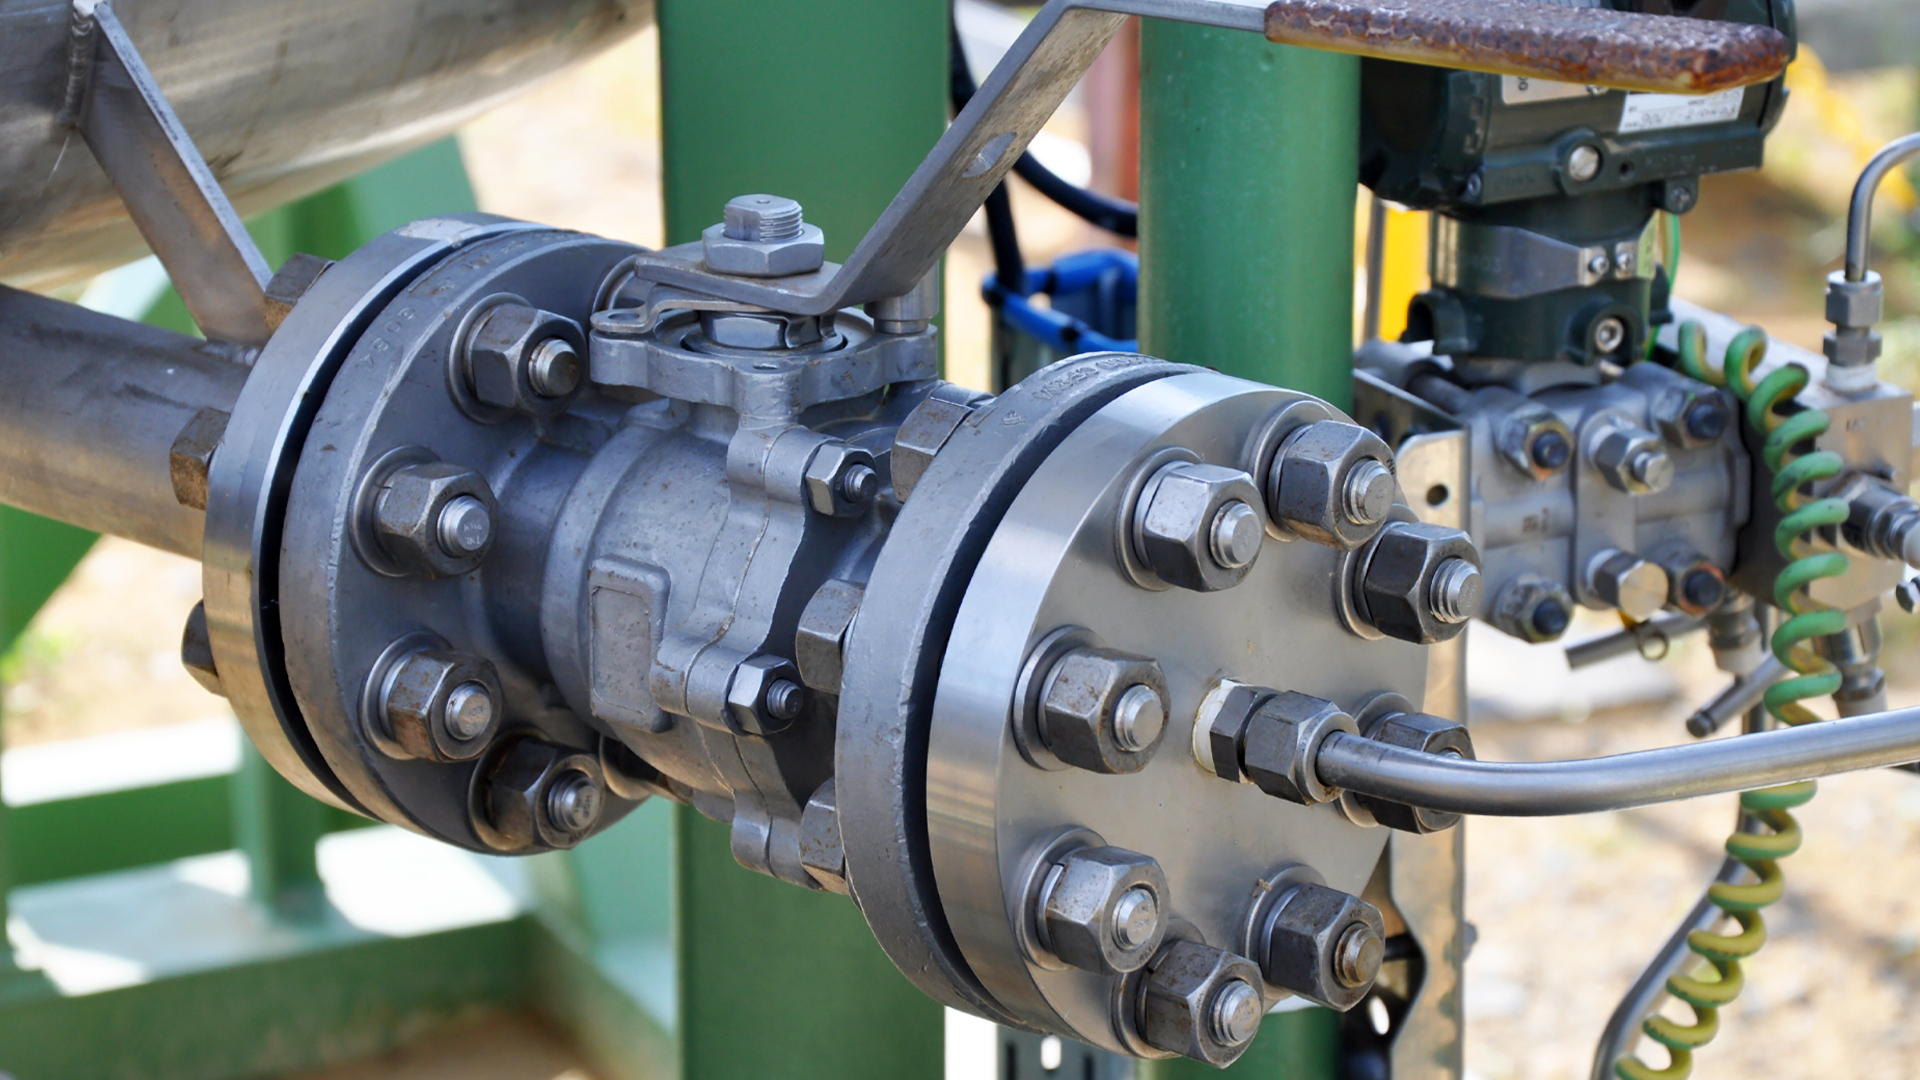 Closeup view of Industrial ball valves